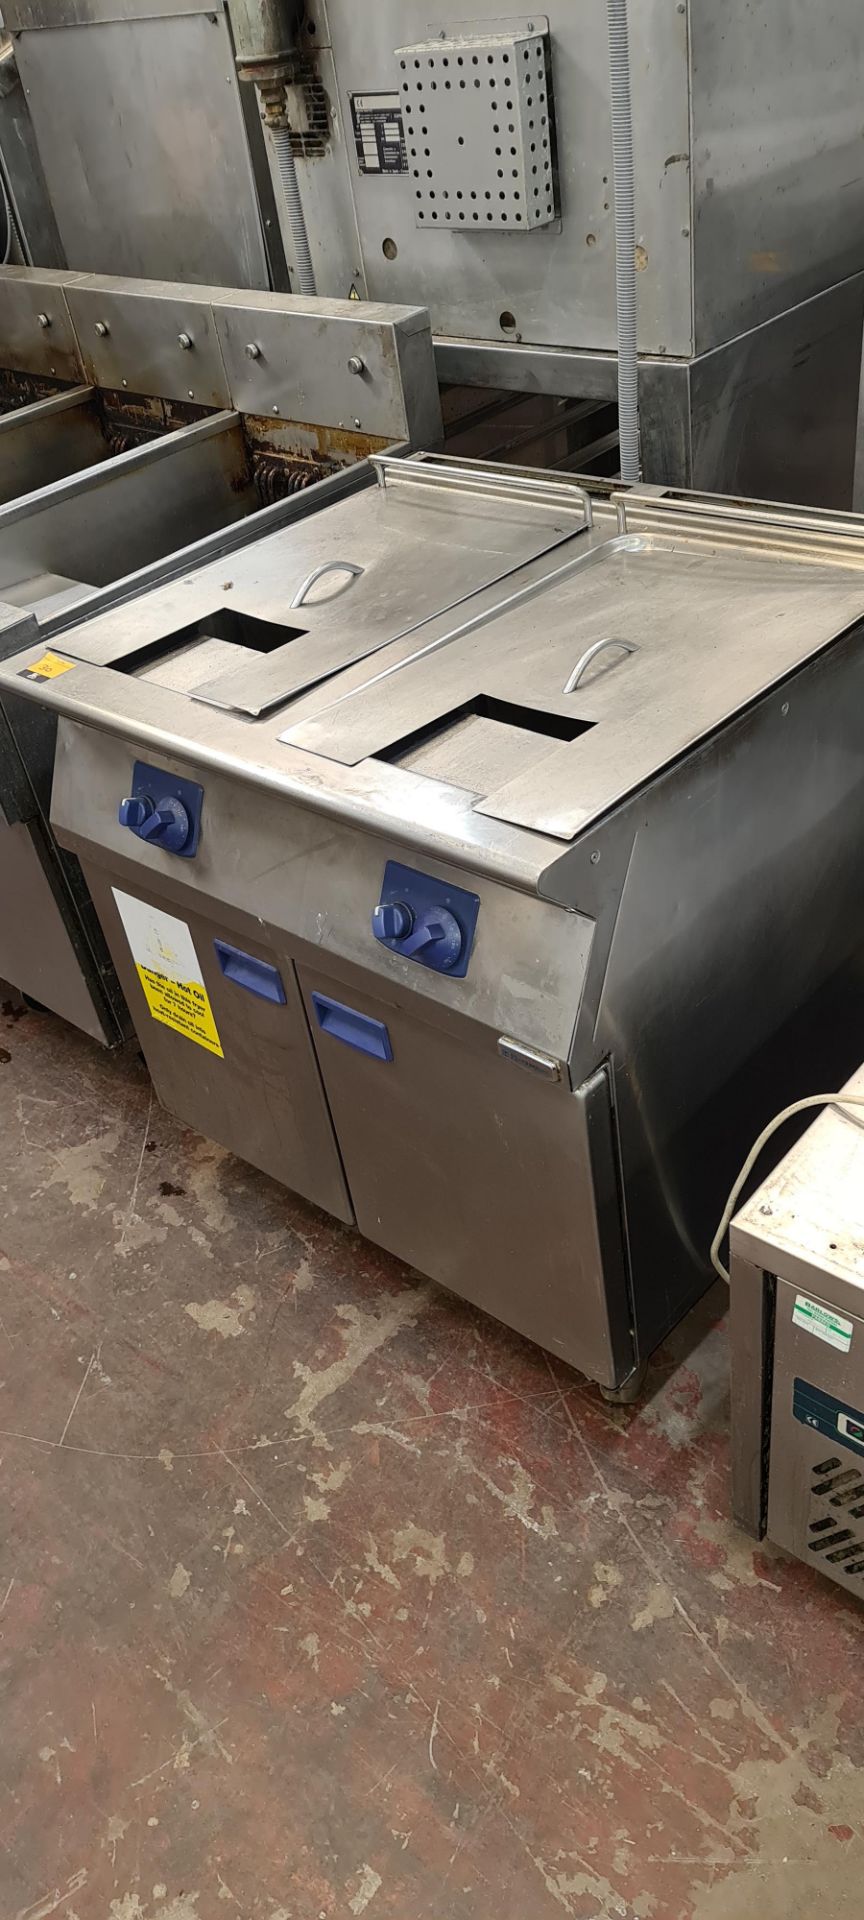 Electrolux stainless steel twin well deep fat fryer system model QFRG800 - Image 2 of 6